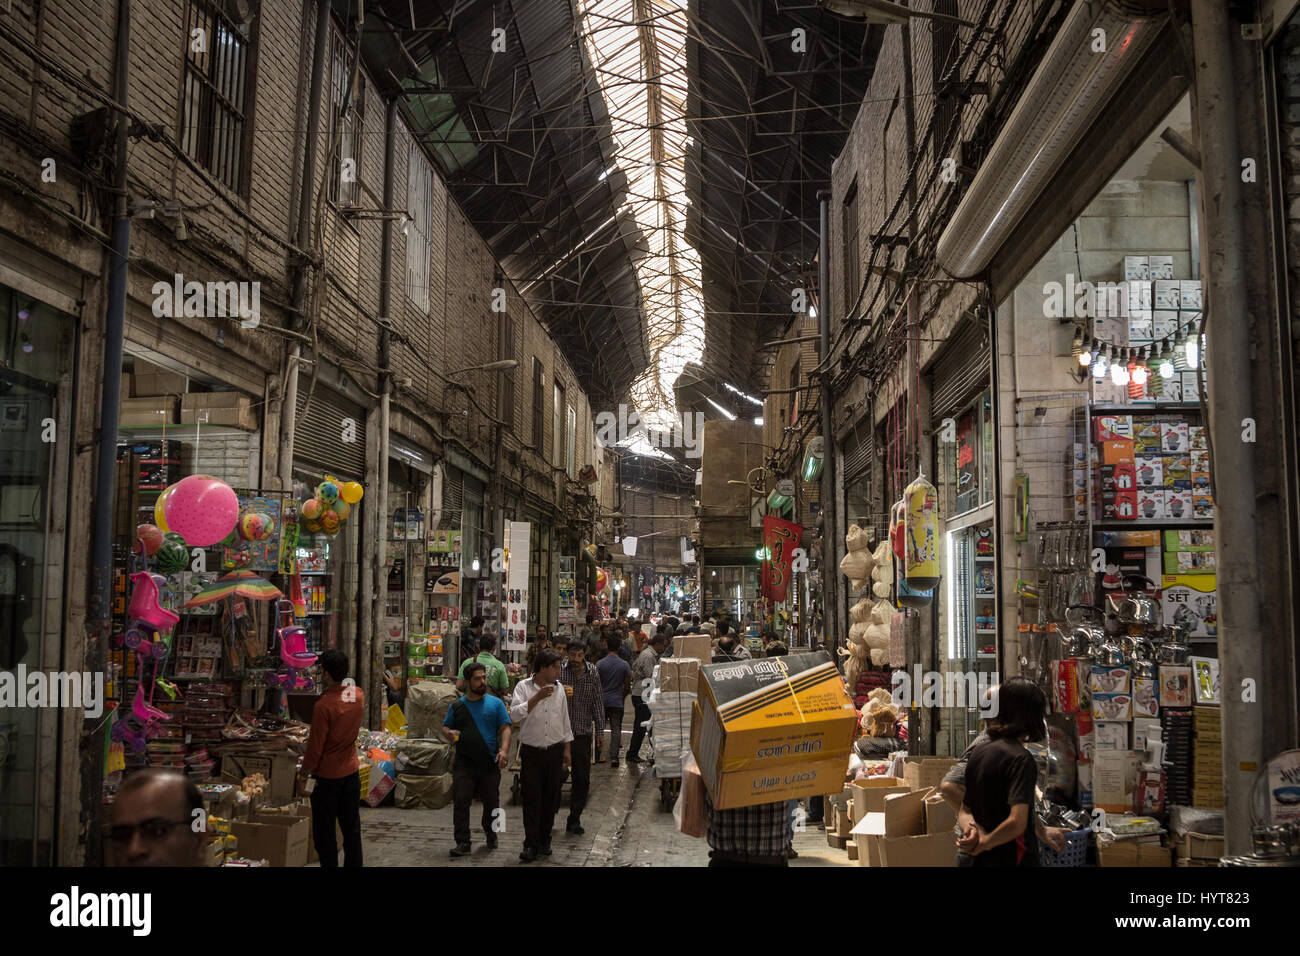 Picturesque photo of Tehran bazaar with warm colors and iranians walking. Stock Photo